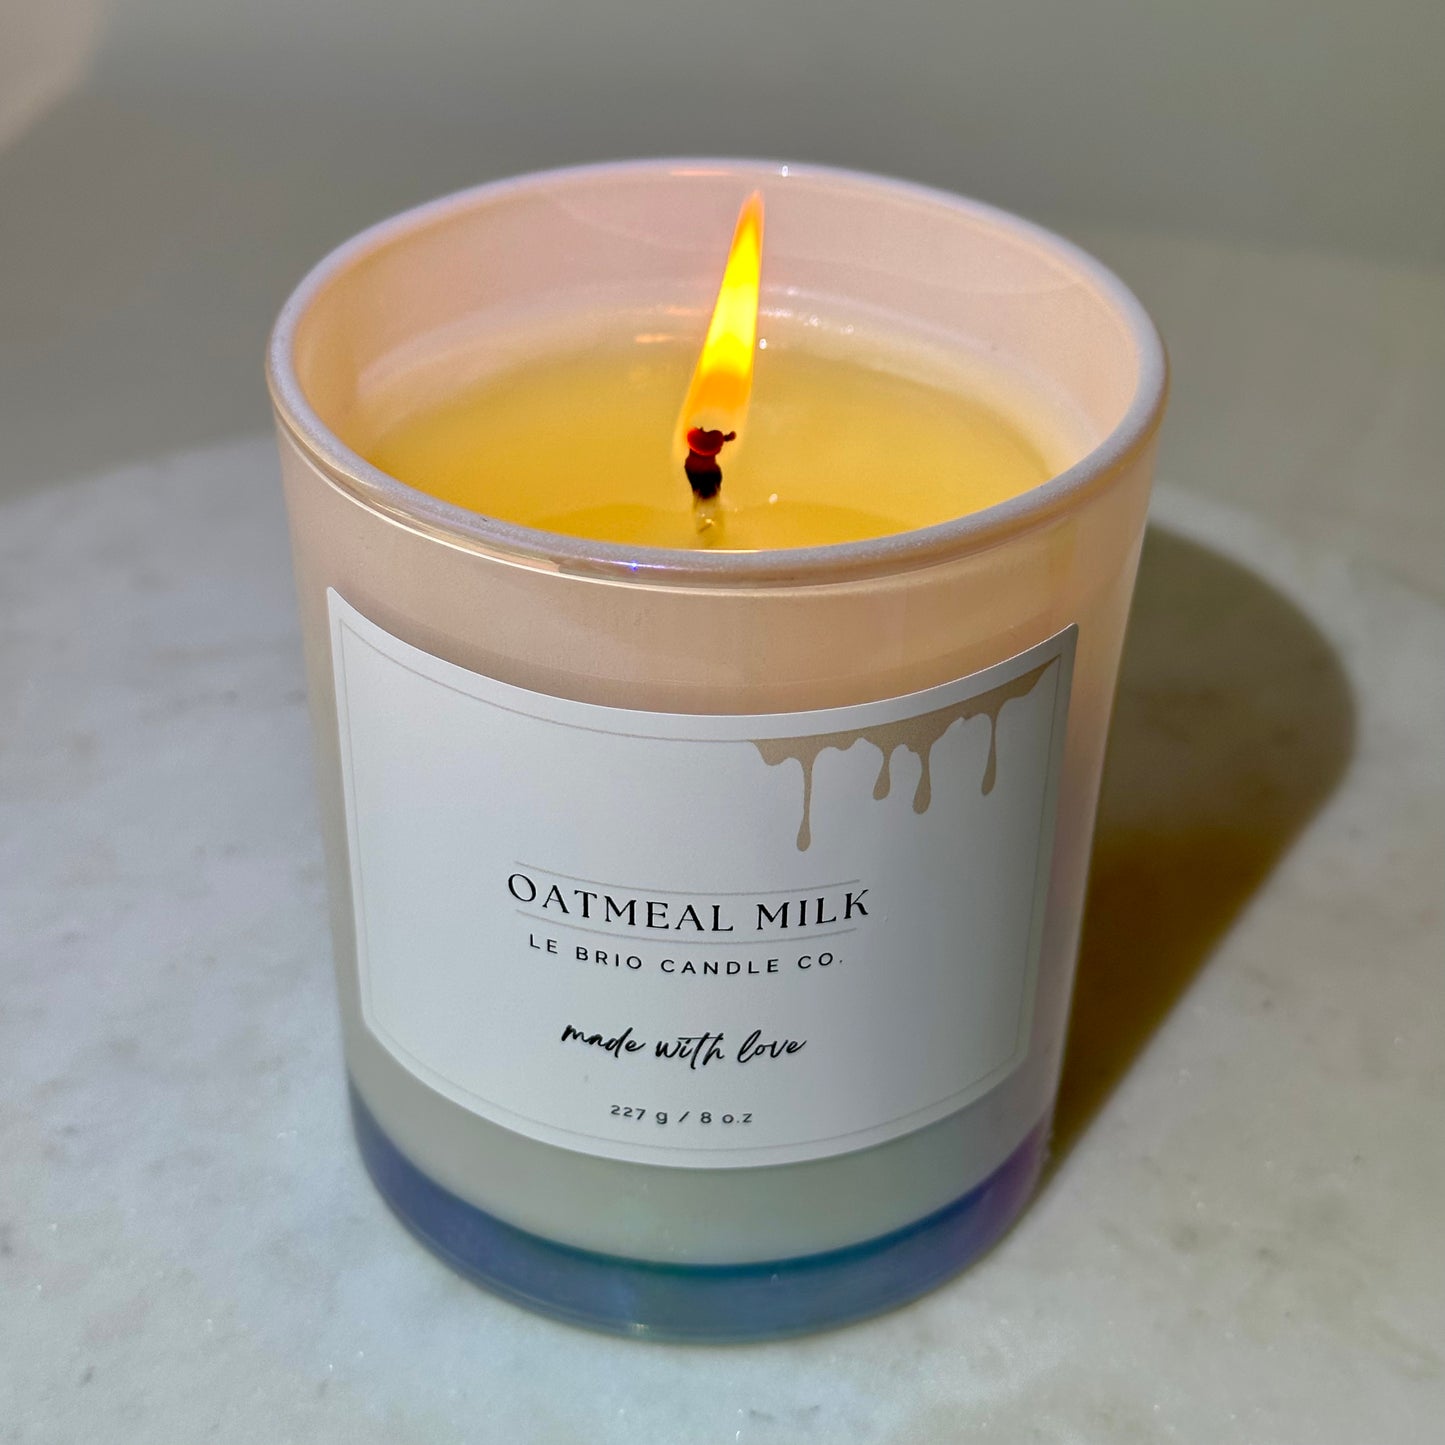 Oatmeal Milk Soy Candle